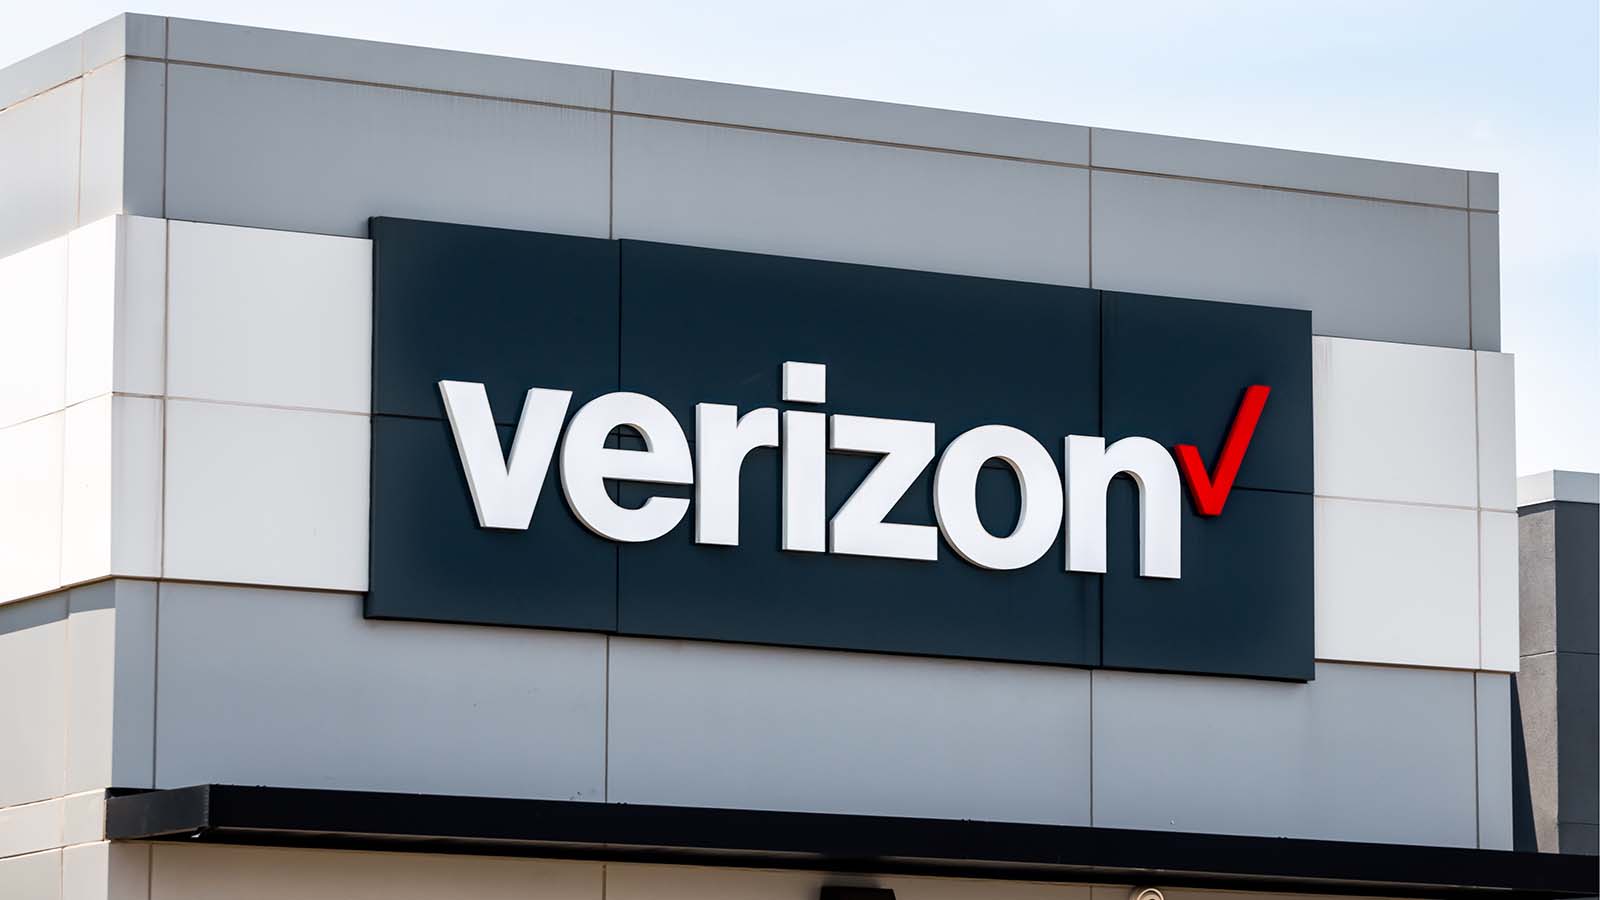 Verizon Under $35: An Income Investor’s Goldmine in the Telecom Space